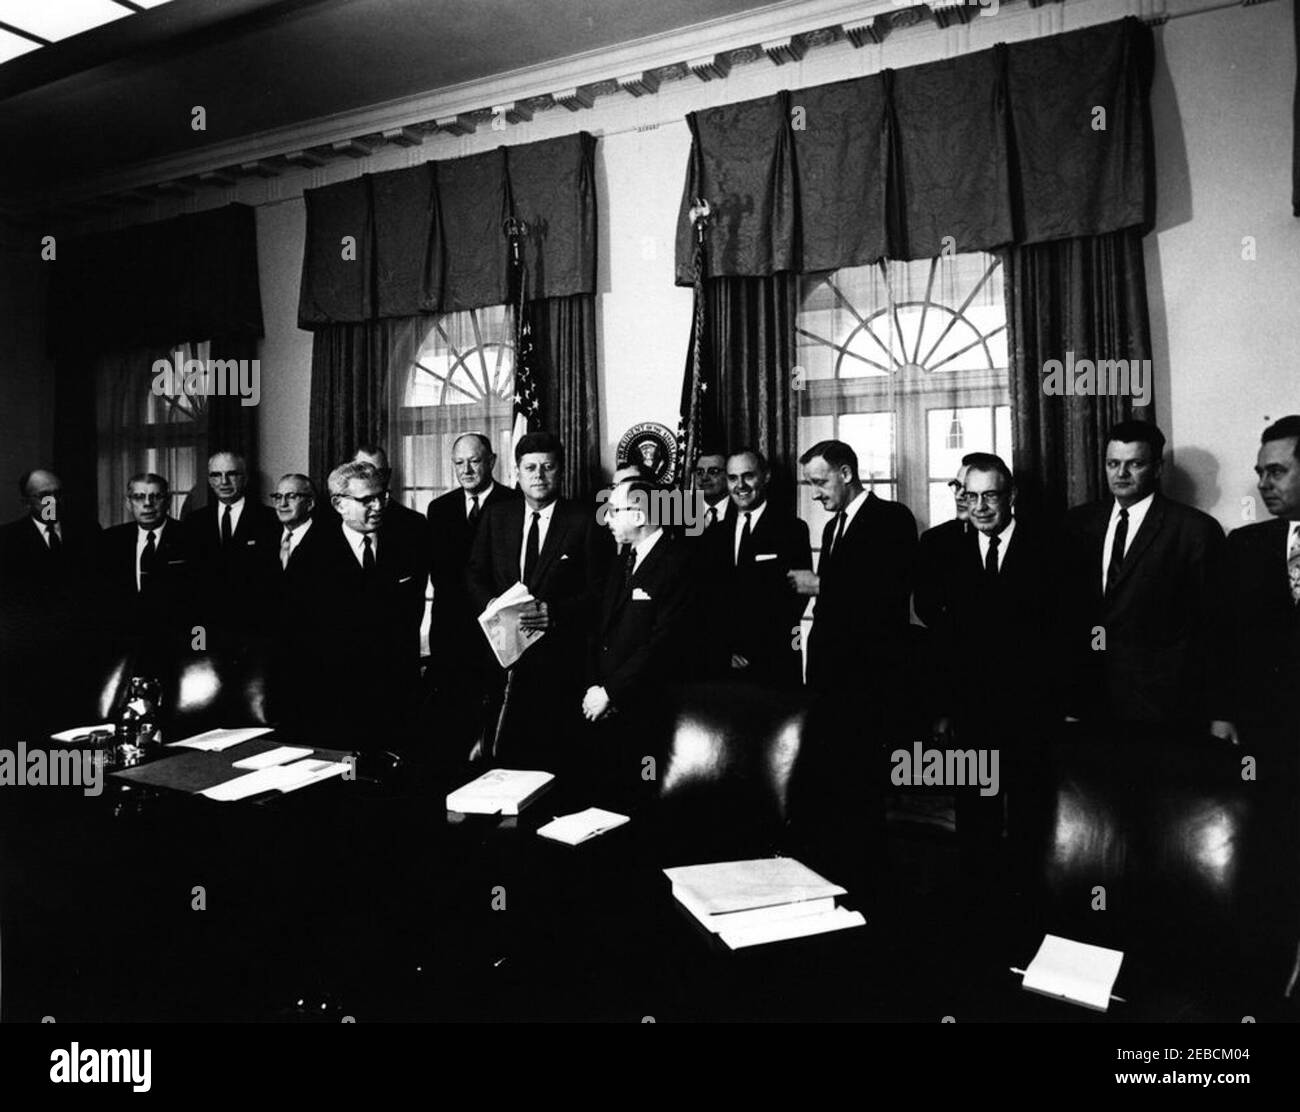 Meeting with Presidential Railroad Commission members, 10:40AM. President John F. Kennedy meets with the Presidential Railroad Commission members in the Cabinet Room, White House, Washington, D.C. Those present include: Vice Chairman of the Commission Dr. Russell A. Smith; Dr. John T. Dunlop; Dr. Charles A. Myers; Francis J. Robertson; B.B. Bryant; T. A. Jerrow; Guy W. Knight; James E. Wolfe; James W. Fallon; S.W. Holliday; S.C. Phillips; H.F. Sites; A.F. Zimmerman; Chairman of the Commission Judge Simon H. Rifkind; Executive Director Philip Arnow; Secretary of Labor Arthur J. Goldberg. Stock Photo